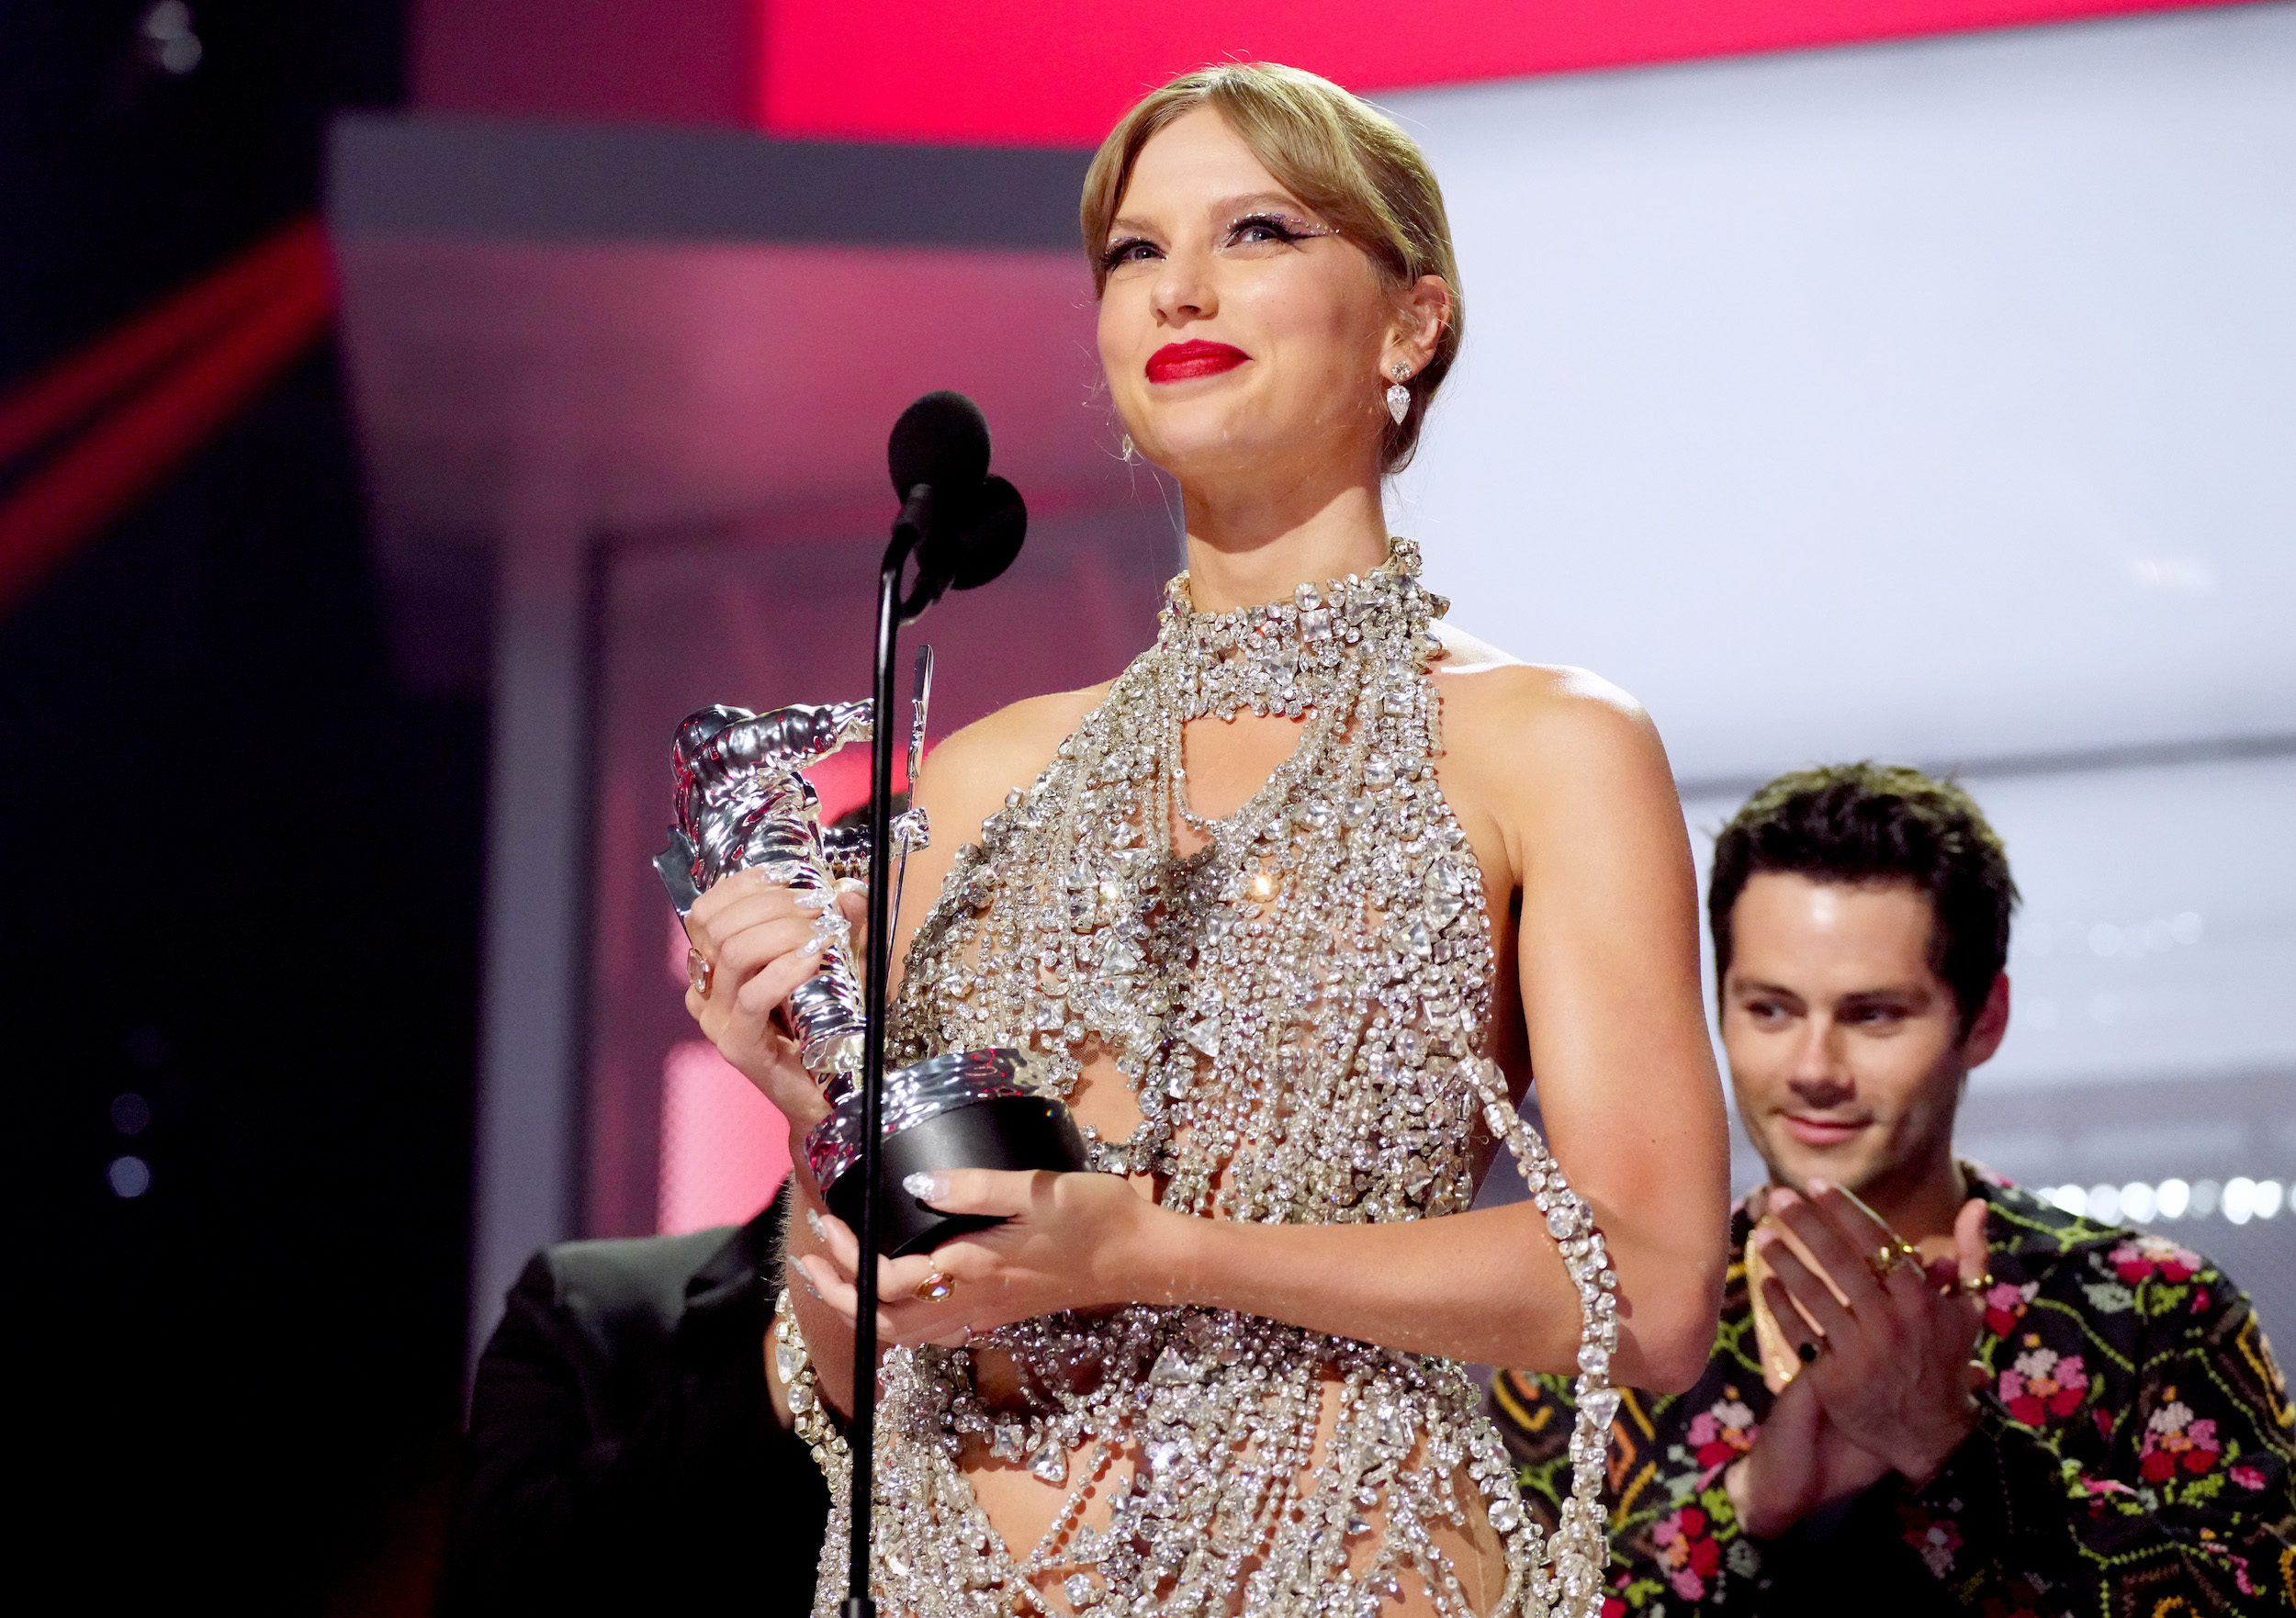 Taylor Swift wins the Video of the Year award at the 2022 VMA's